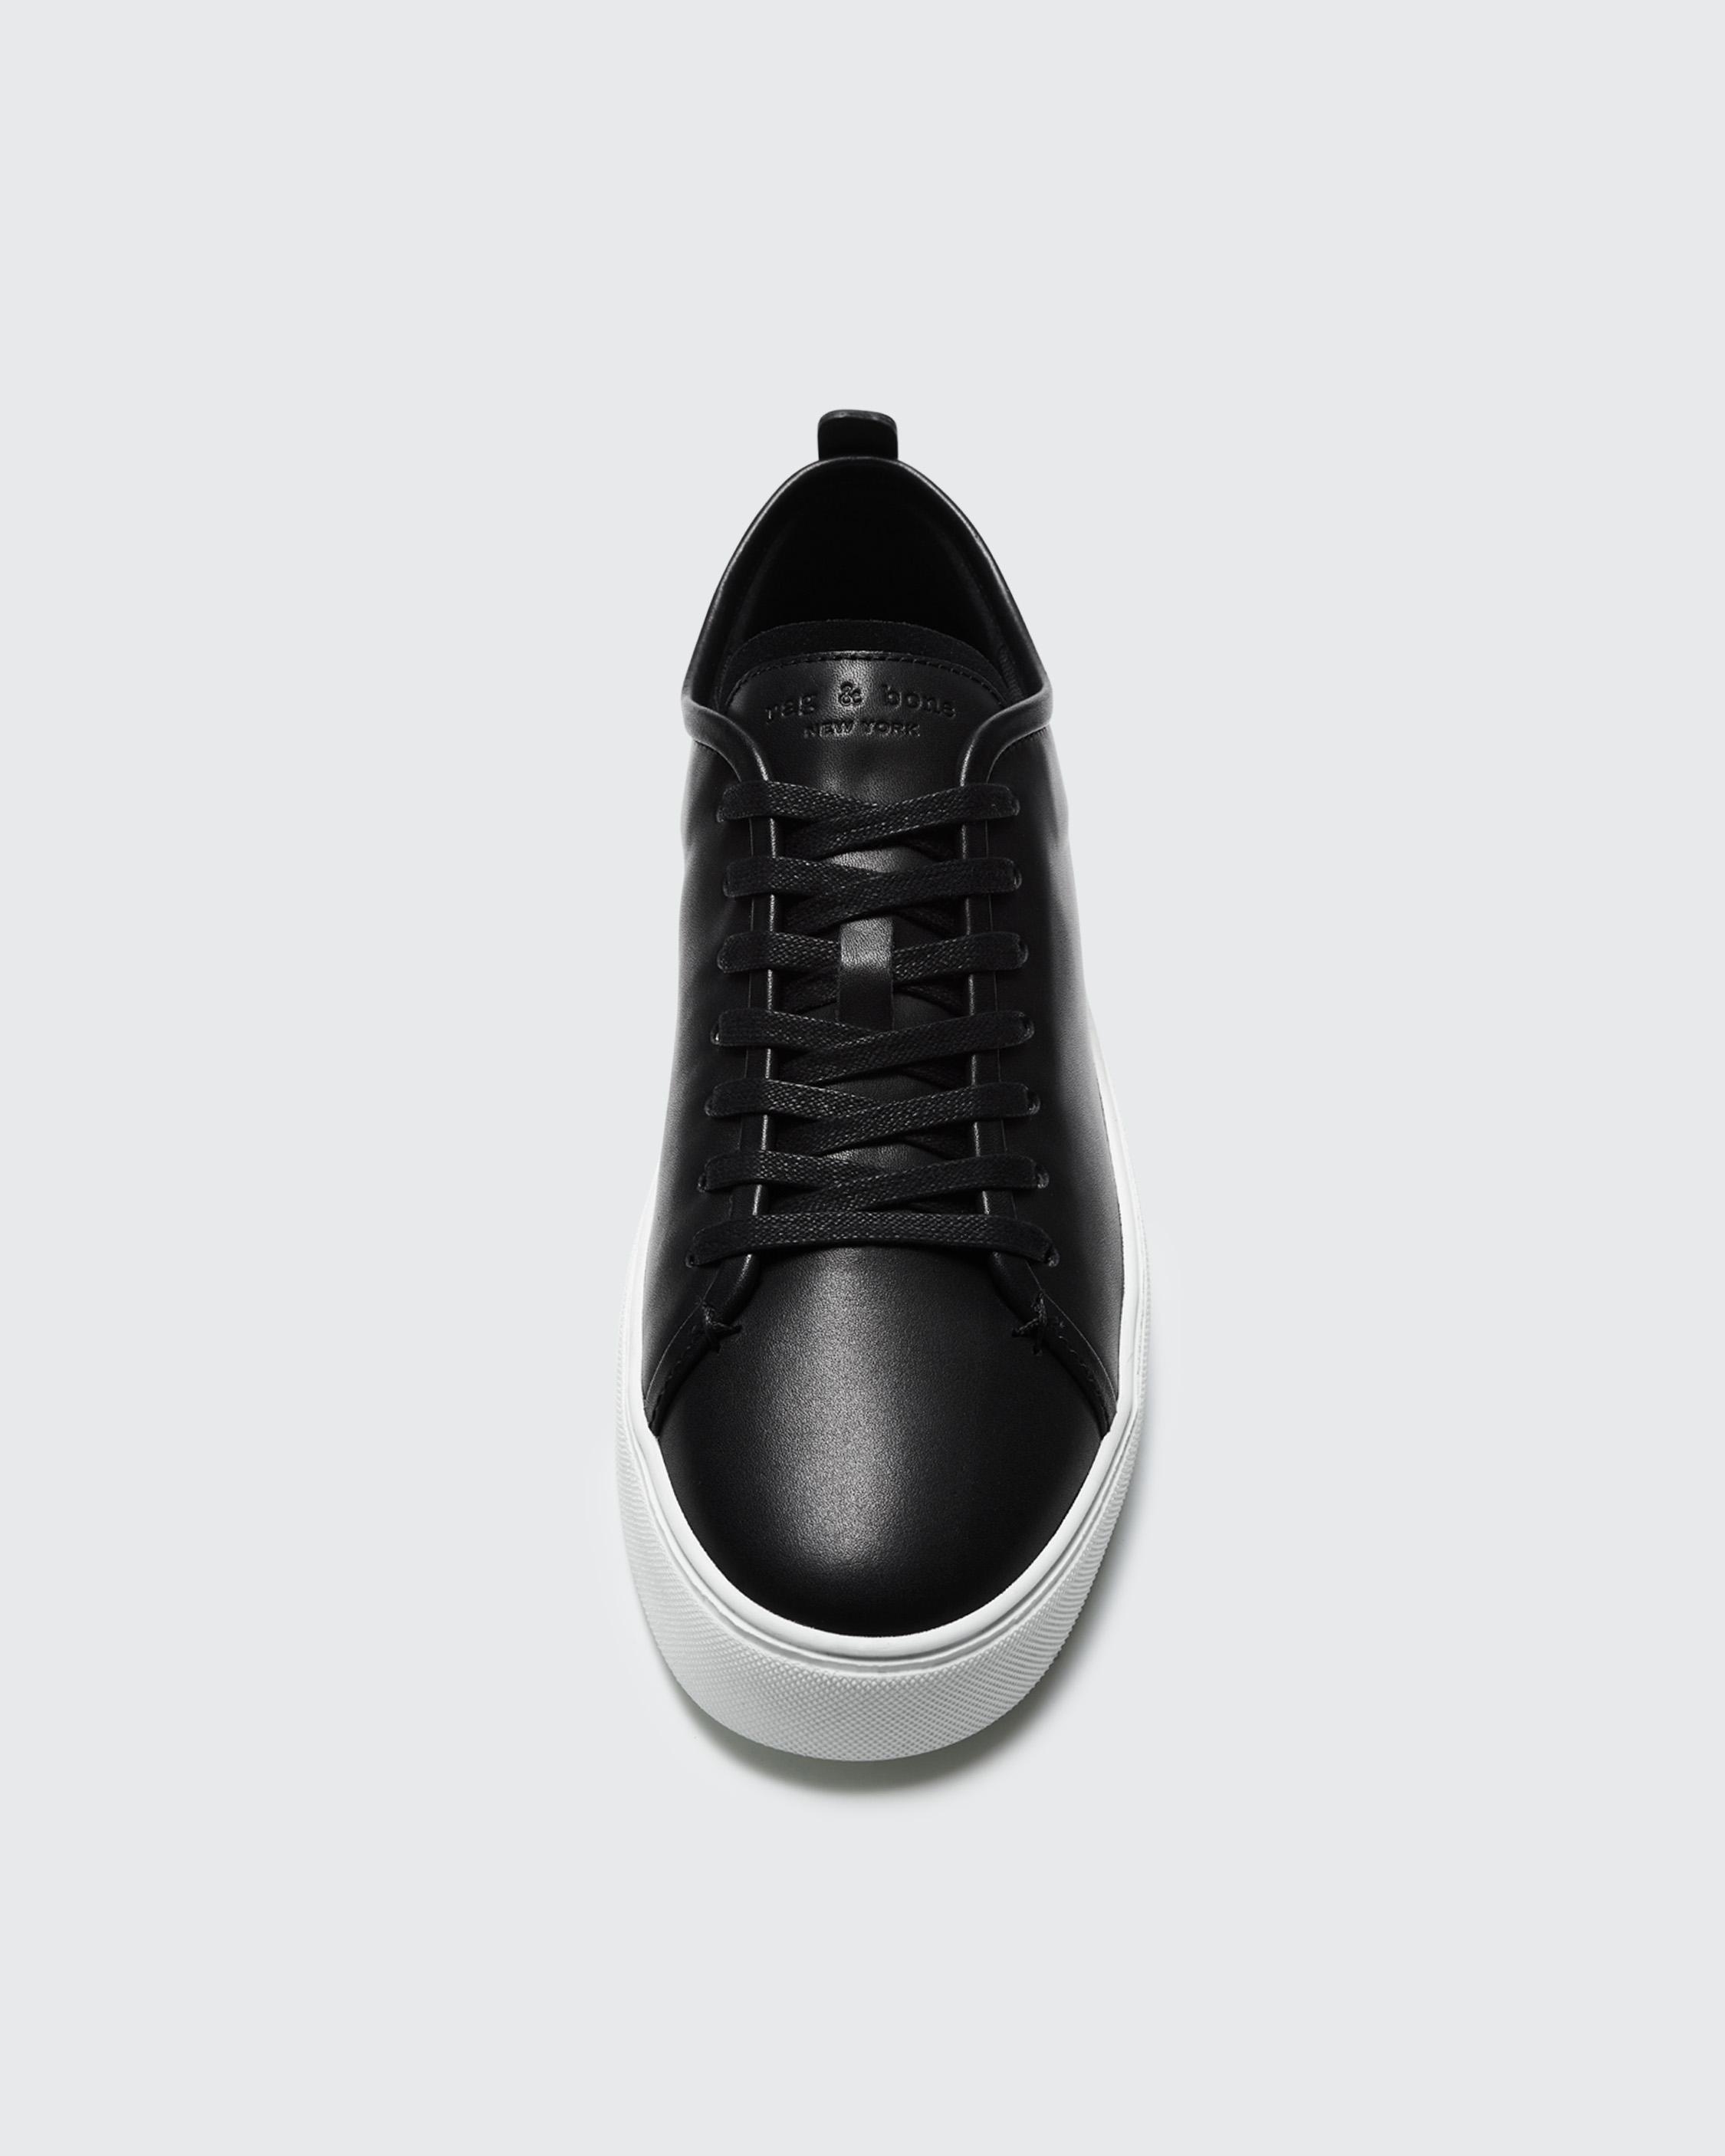 Perry Sneaker - Leather
Low Top Sneaker - 3